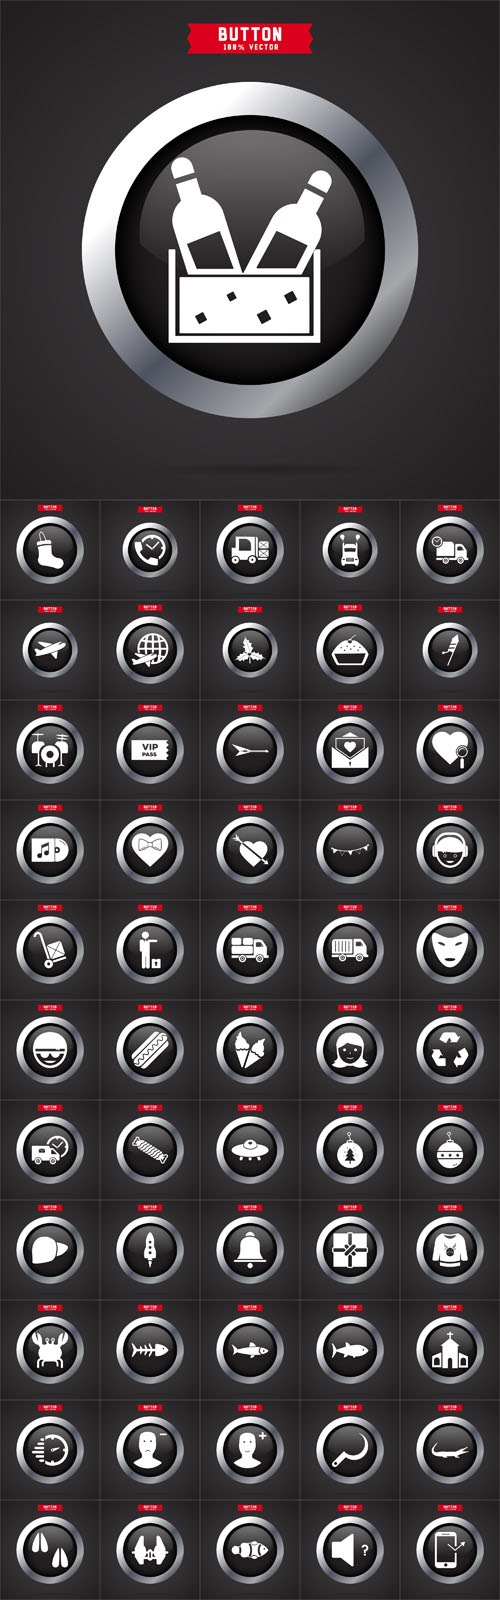 Vector Button Different Icons